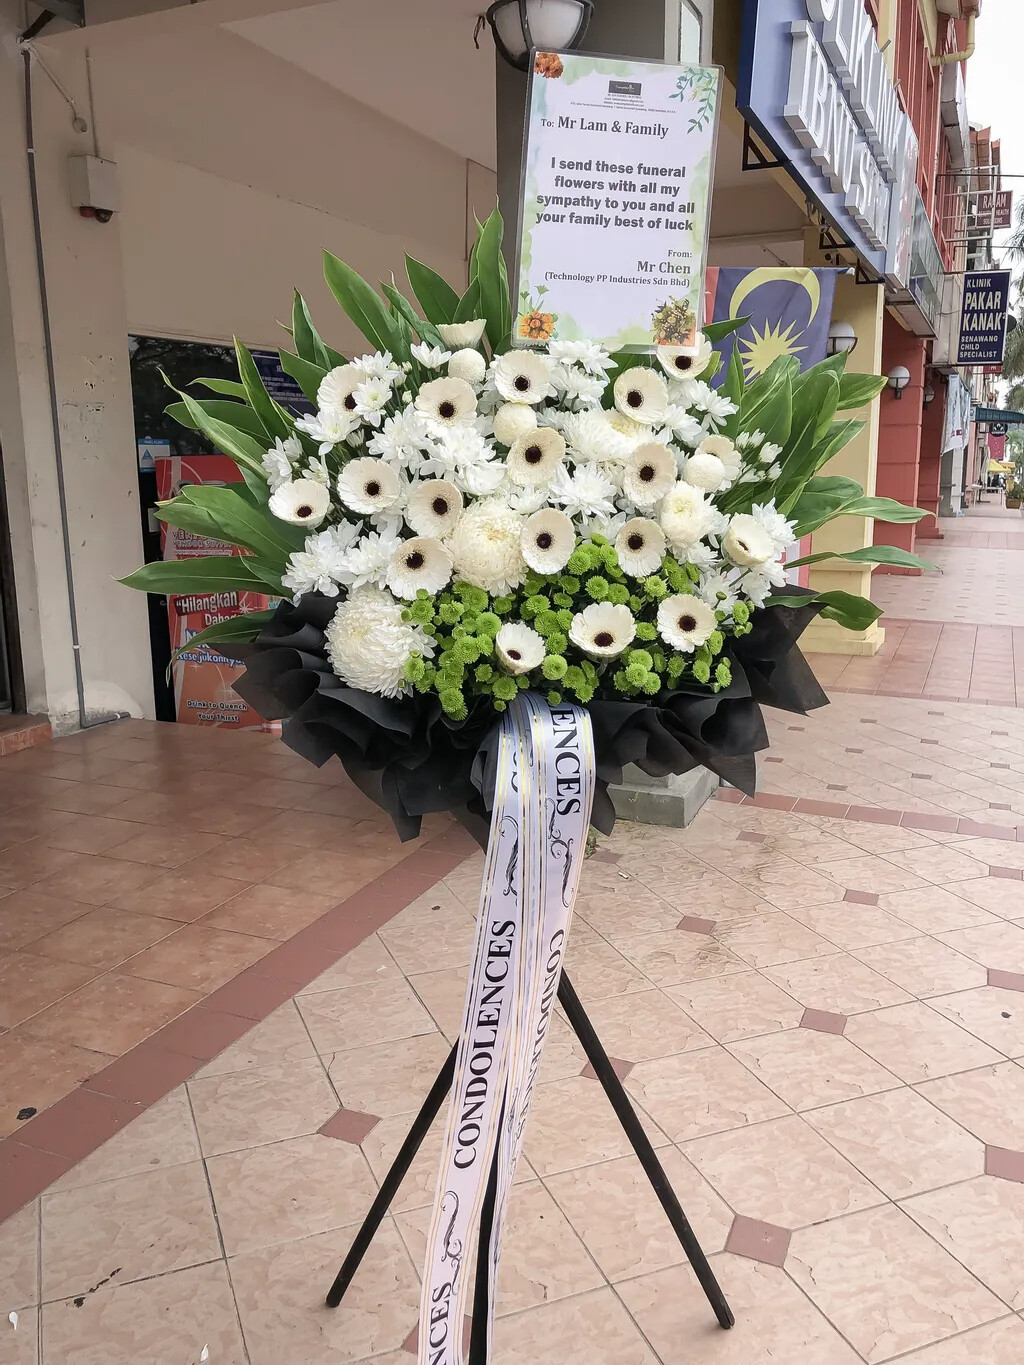 Freedom Condolence Flower Stand (By: Temptation Florist from Seremban)